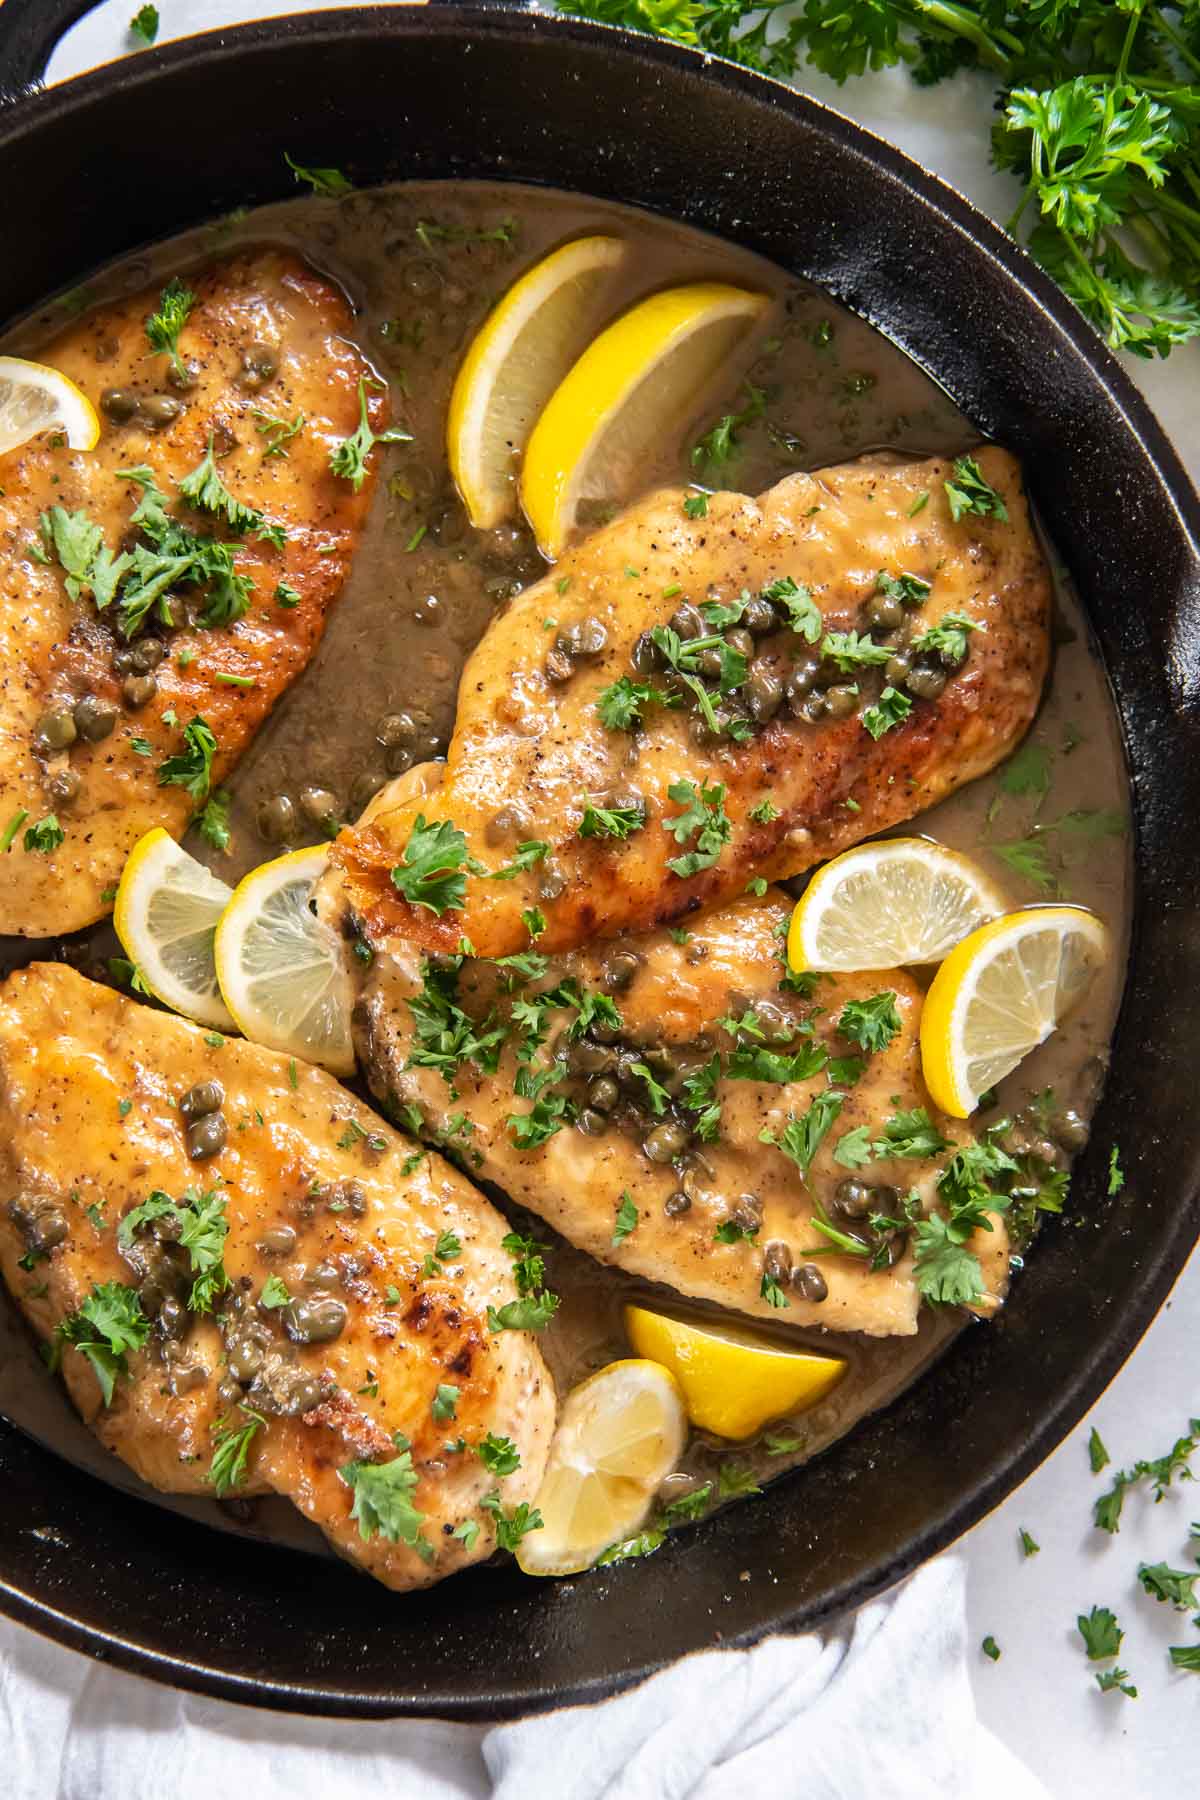 Chicken piccata with fresh parsley and lemon slices in a cast iron skillet.